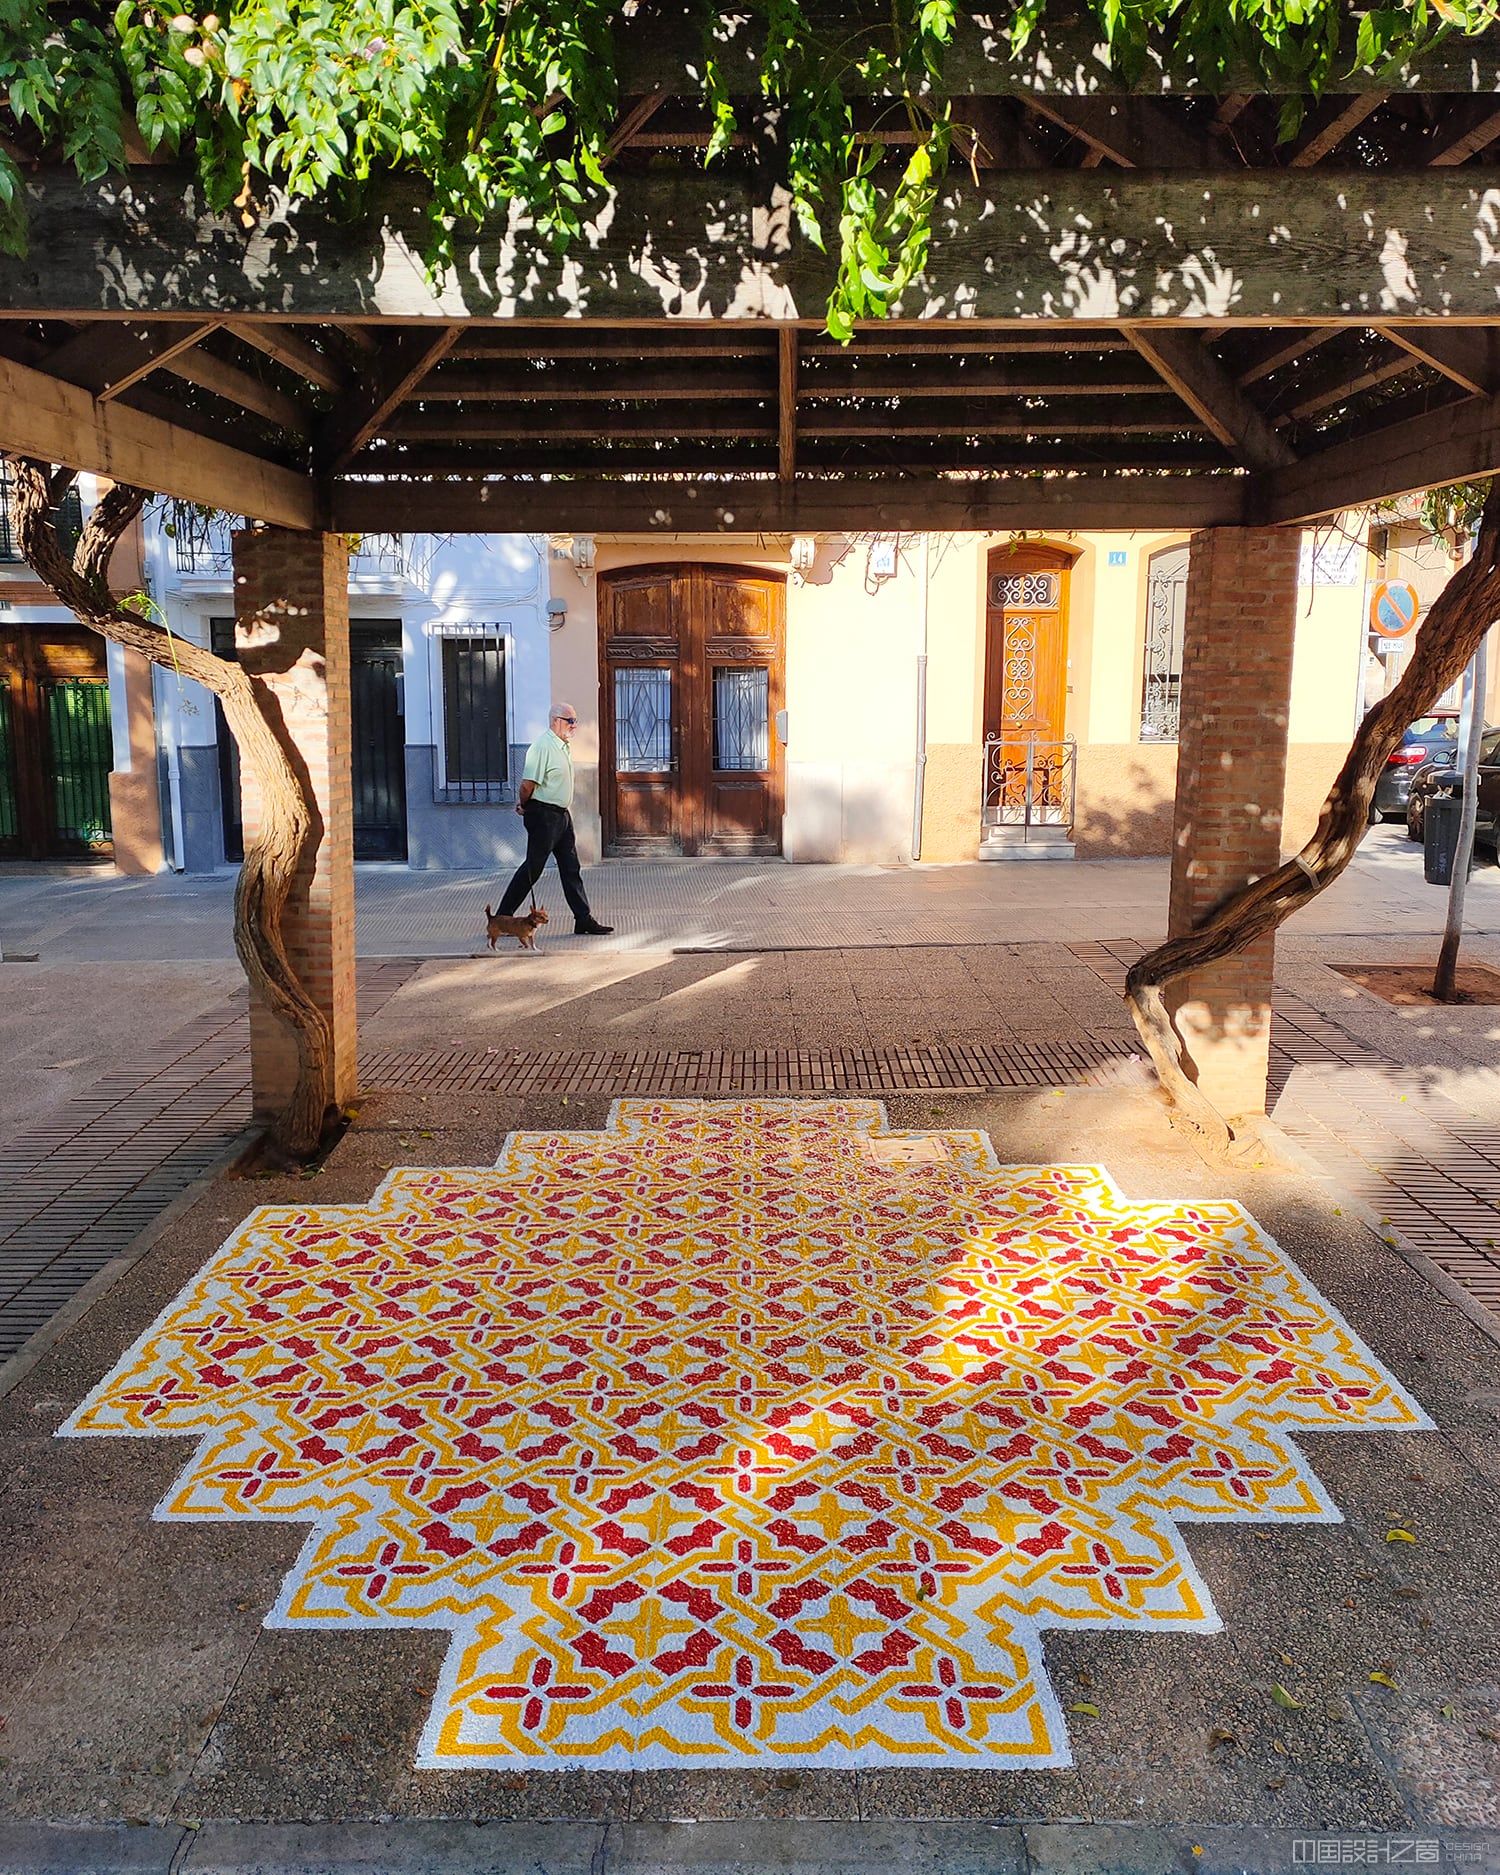 A photo of a vibrant patterned rug-like intervention painted on the co<em></em>ncrete in a city